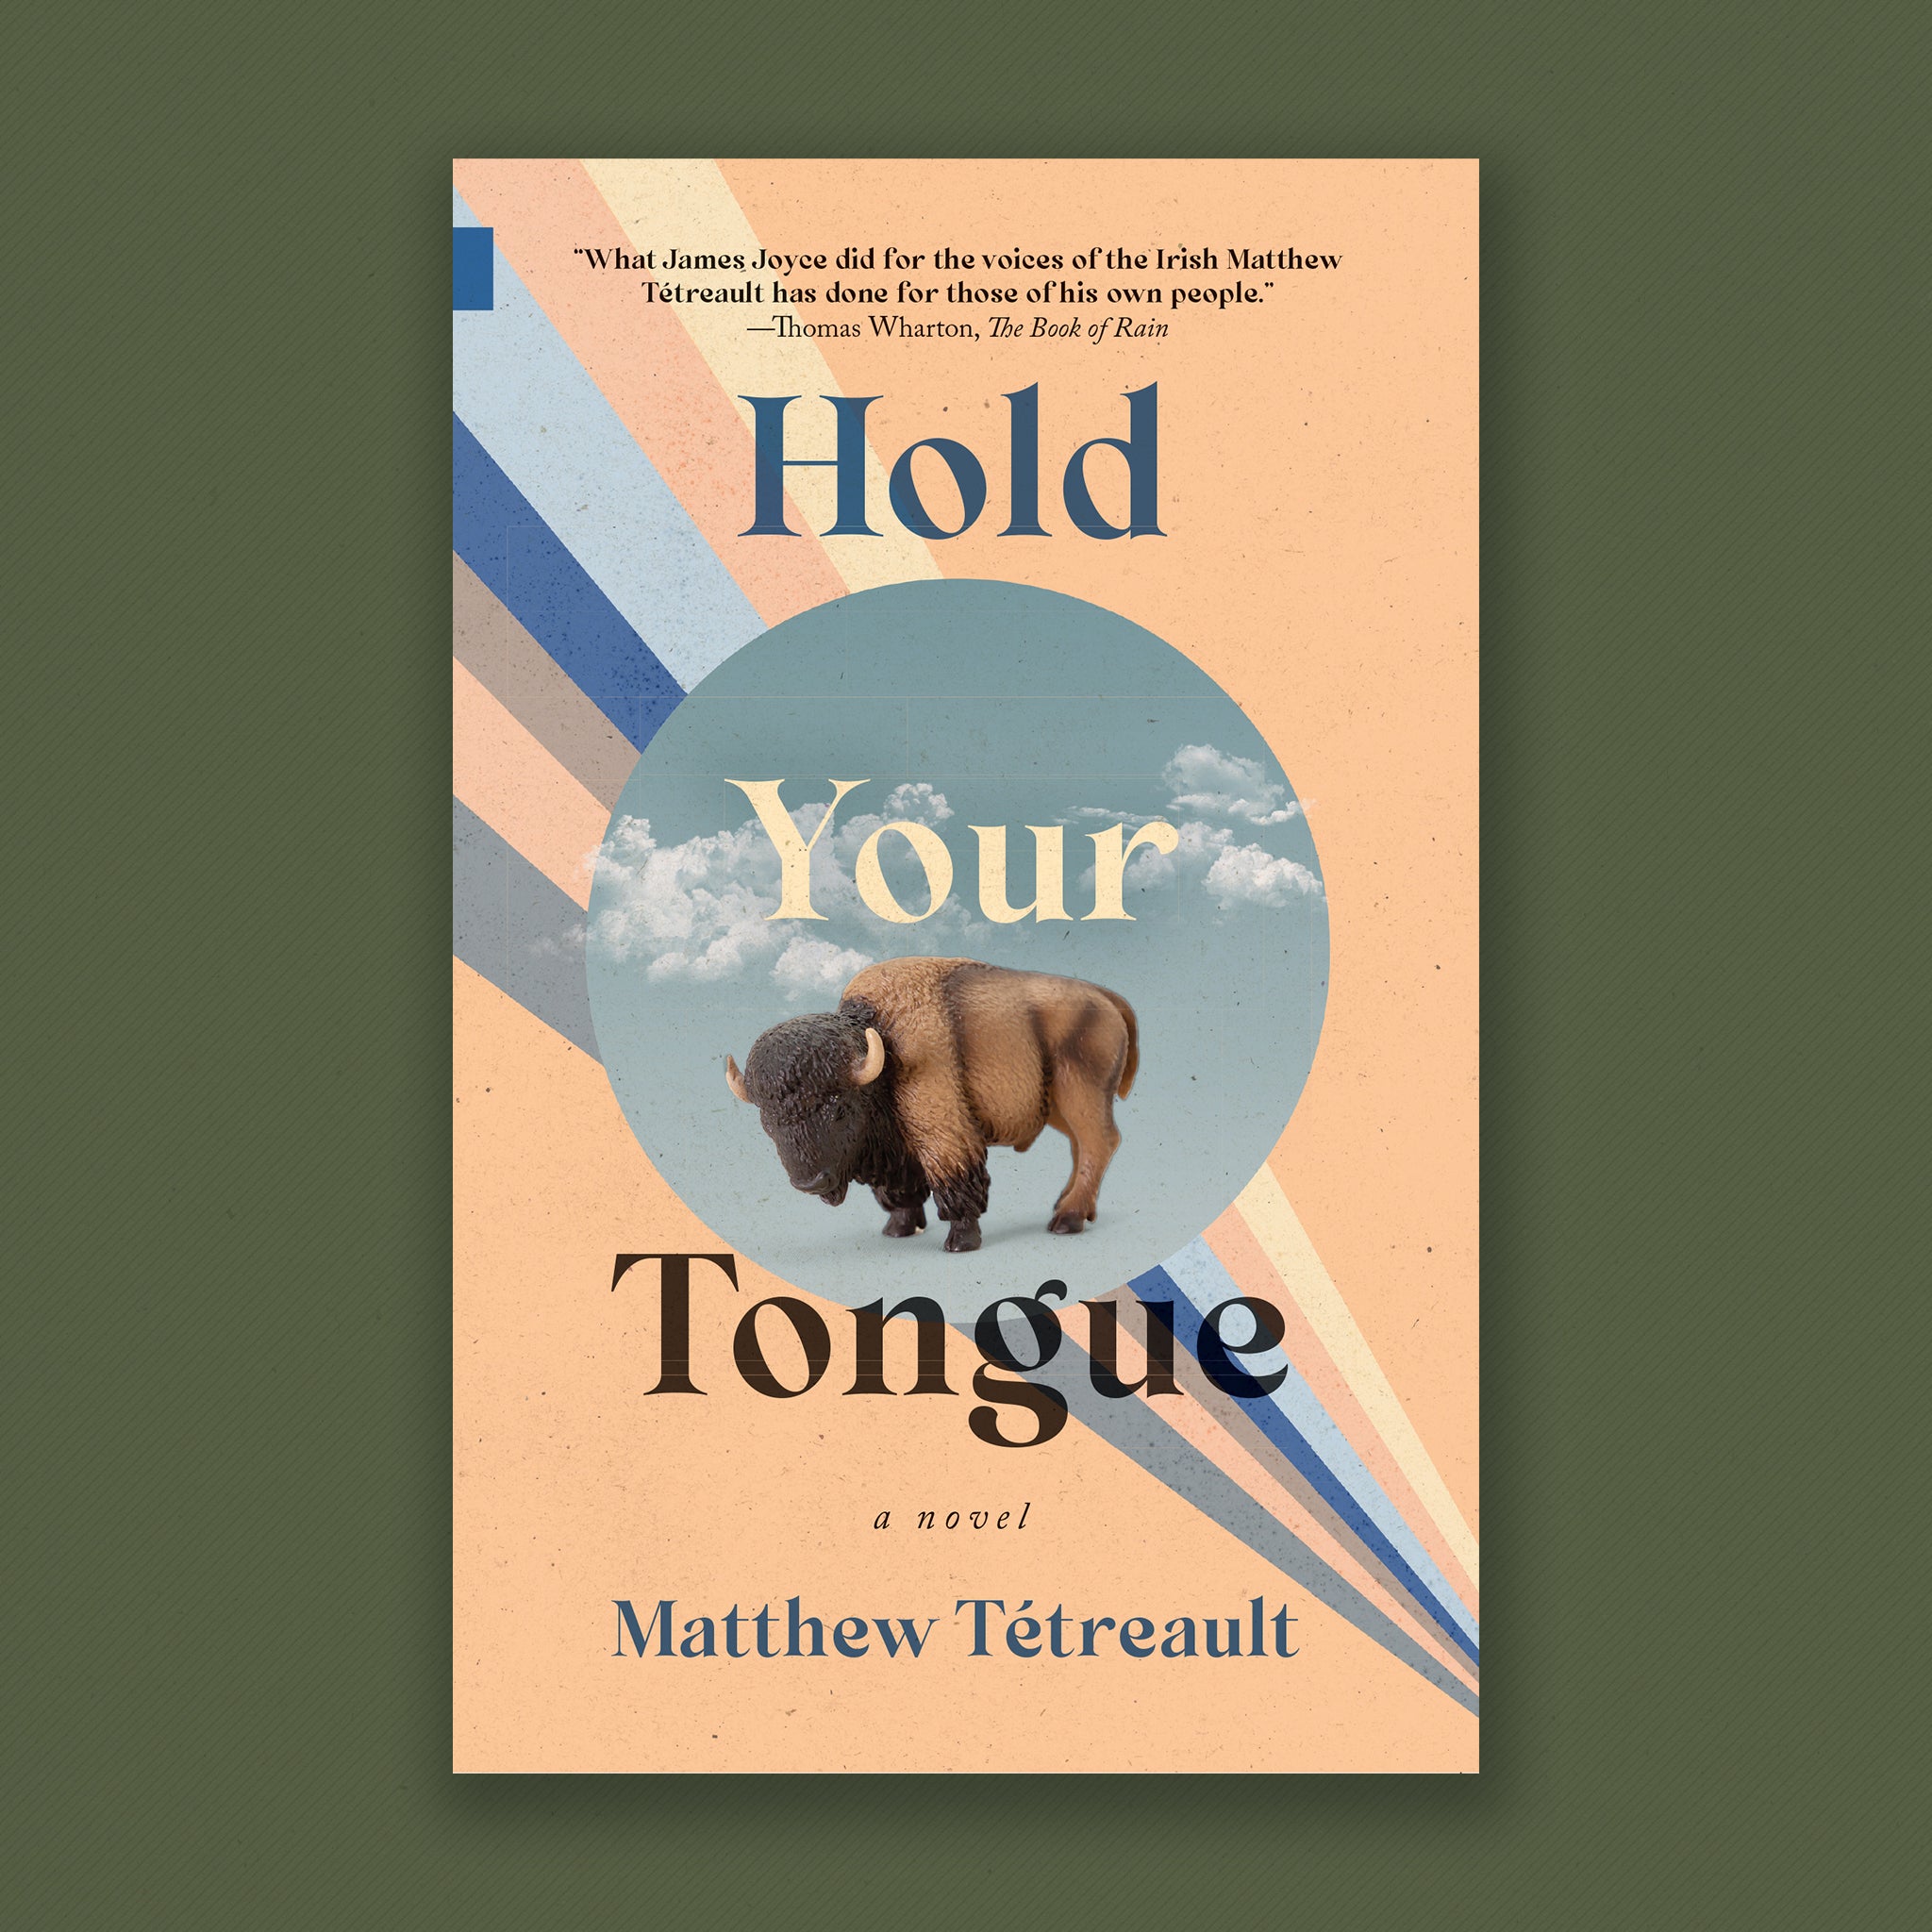 Hold Your Tongue